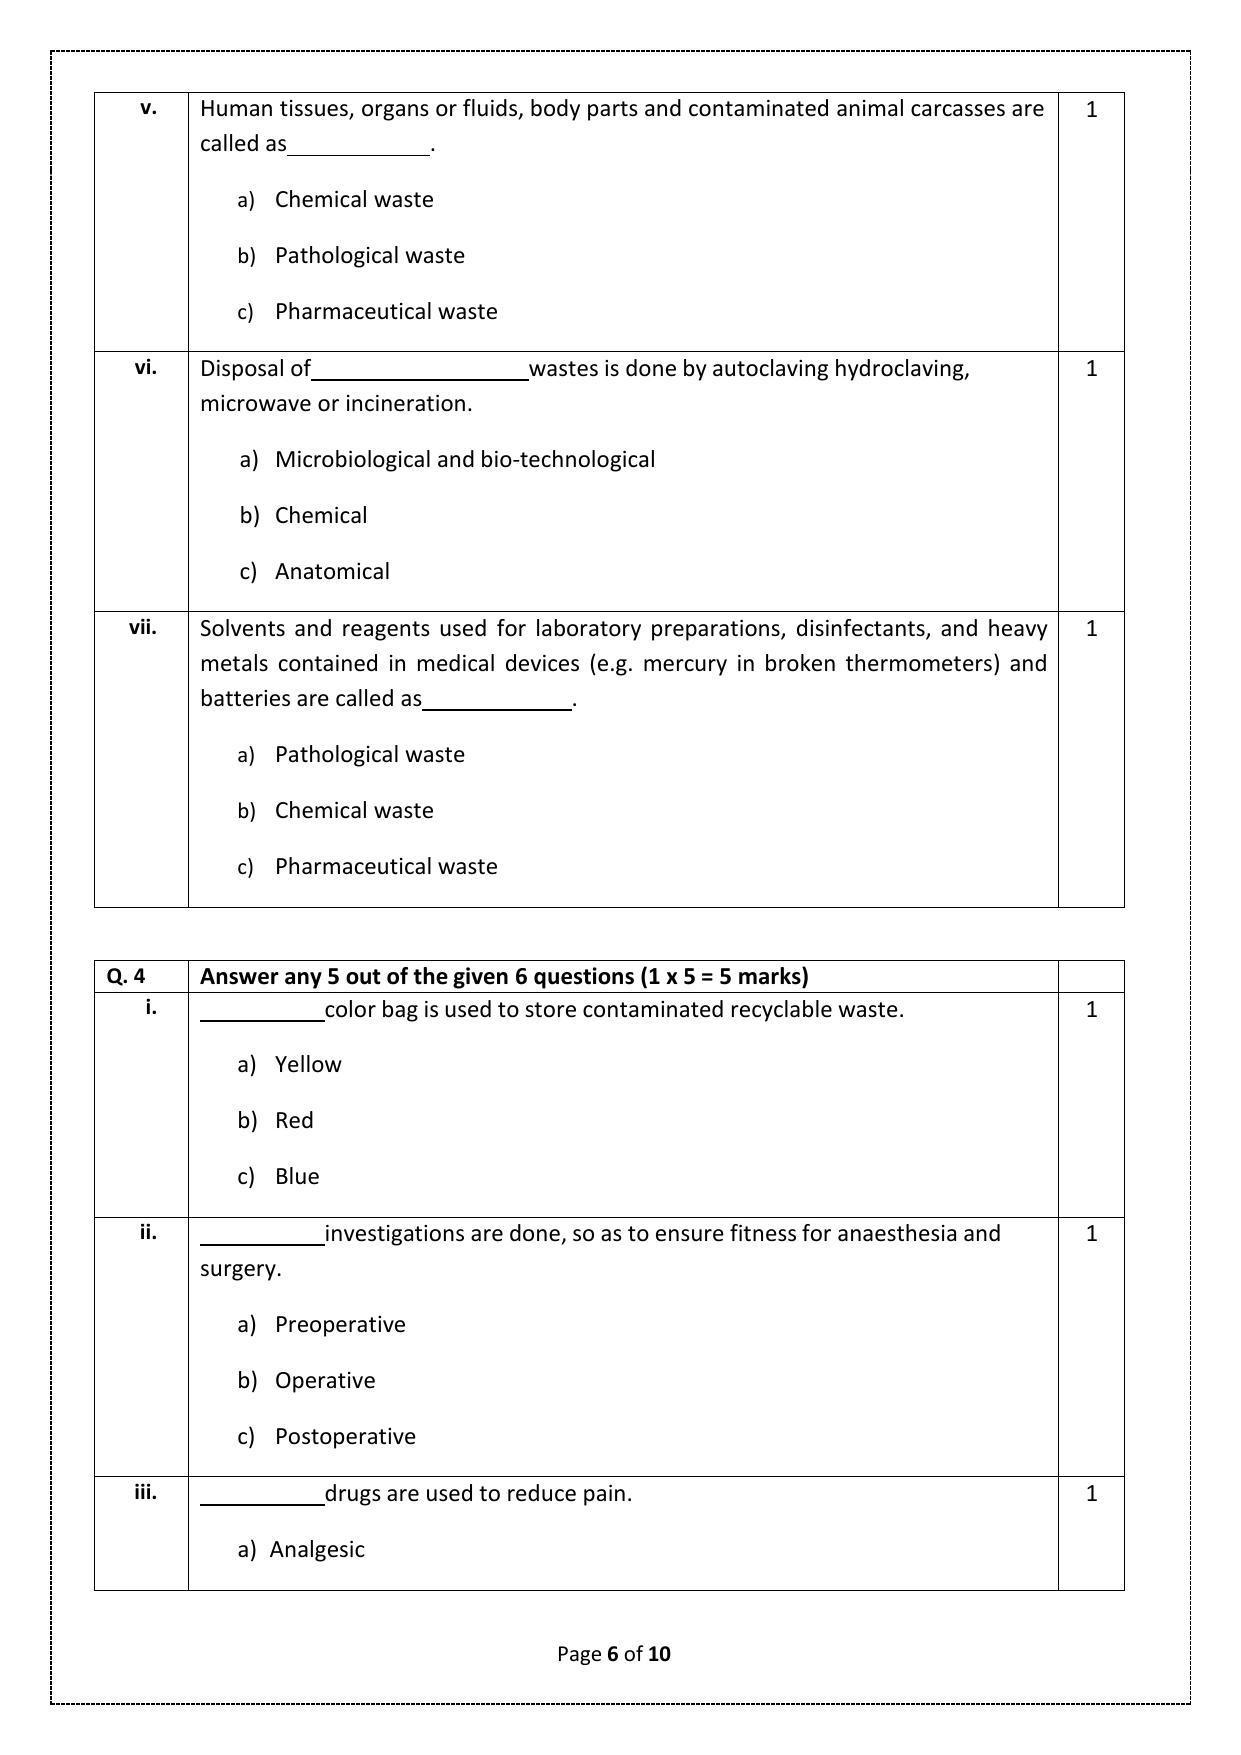 CBSE Class 12 Health Care (Skill Education) Sample Papers 2023 - Page 6